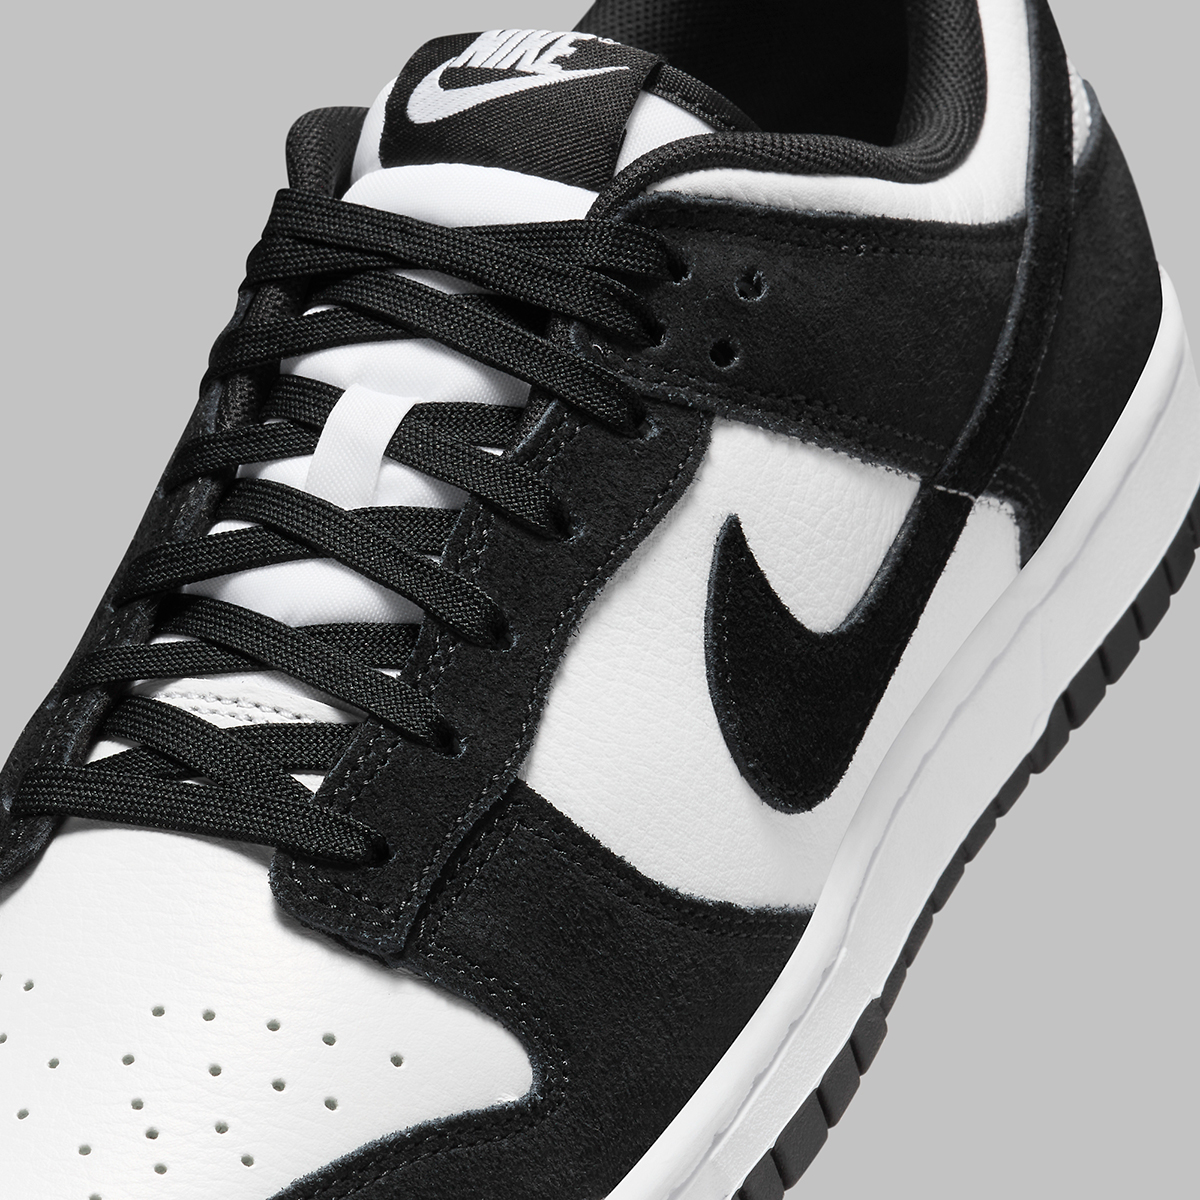 nike air vapor quick 2 prices in texas time Suede Panda Fq8249 100 4